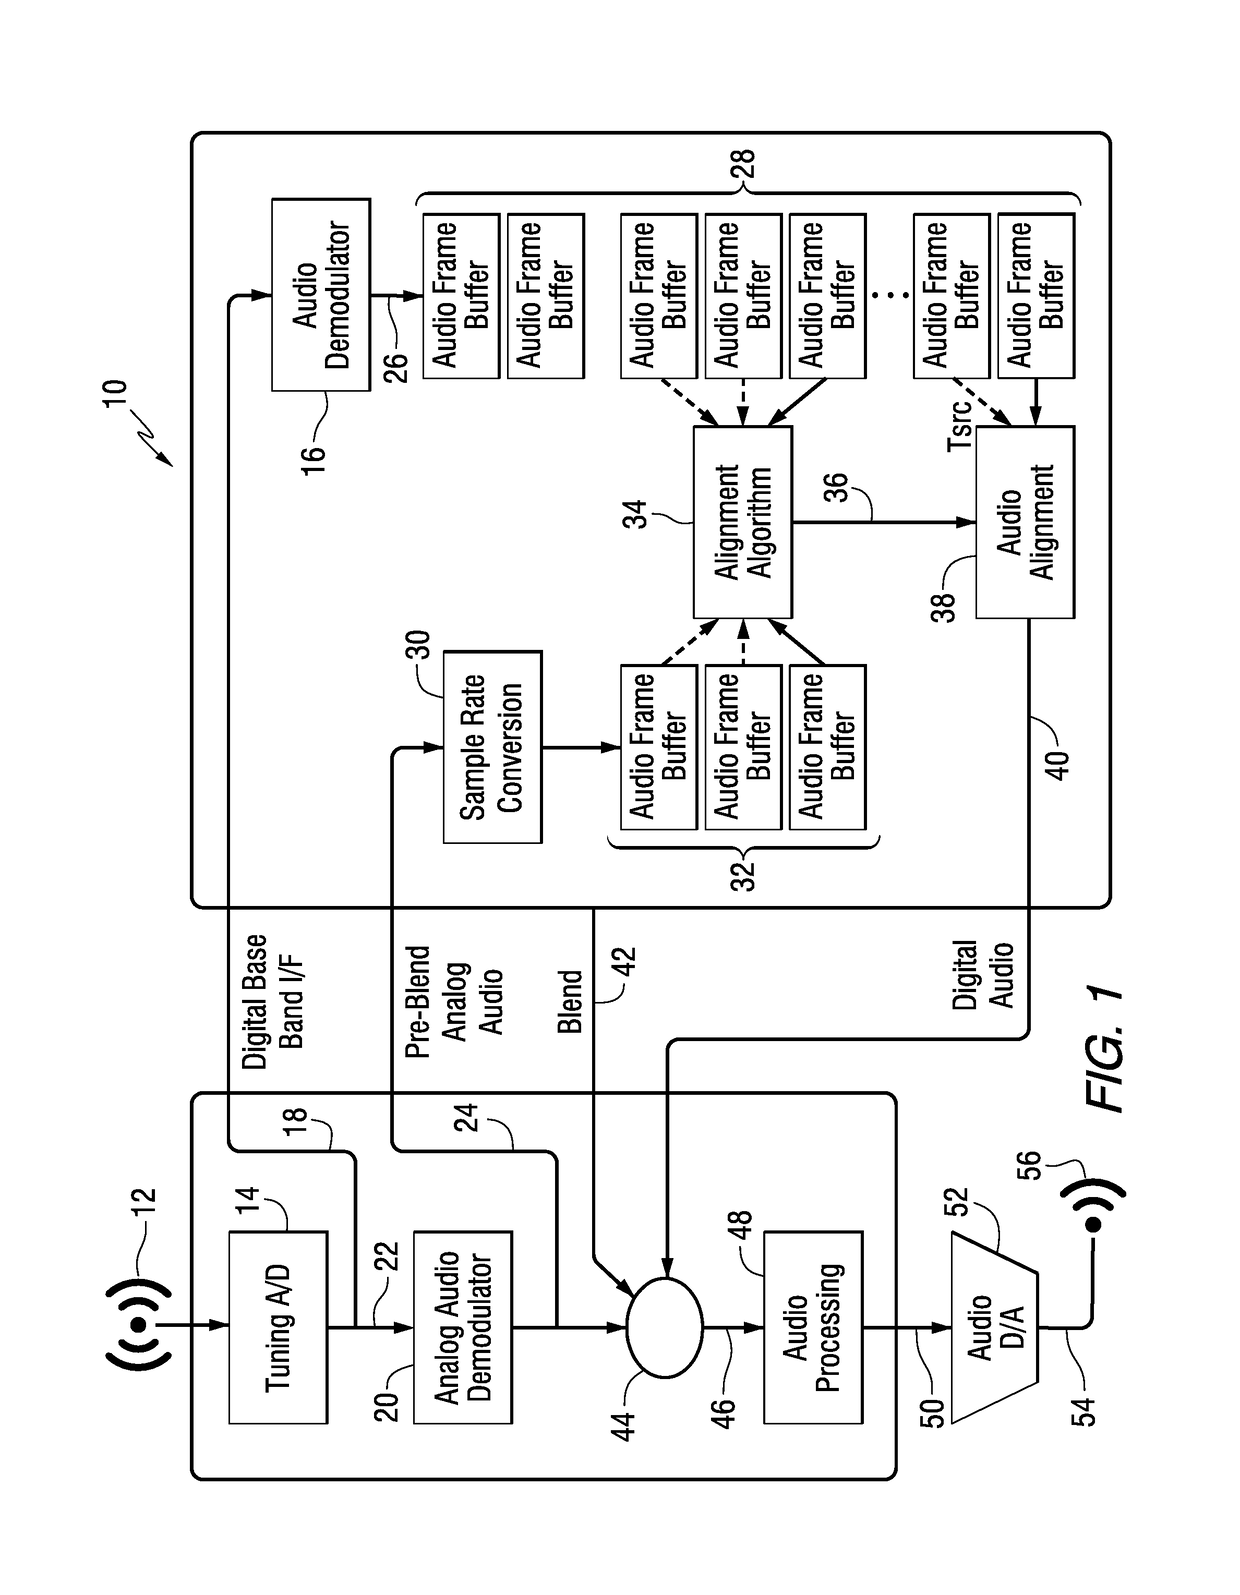 Method and apparatus for automatic audio alignment in a hybrid radio system